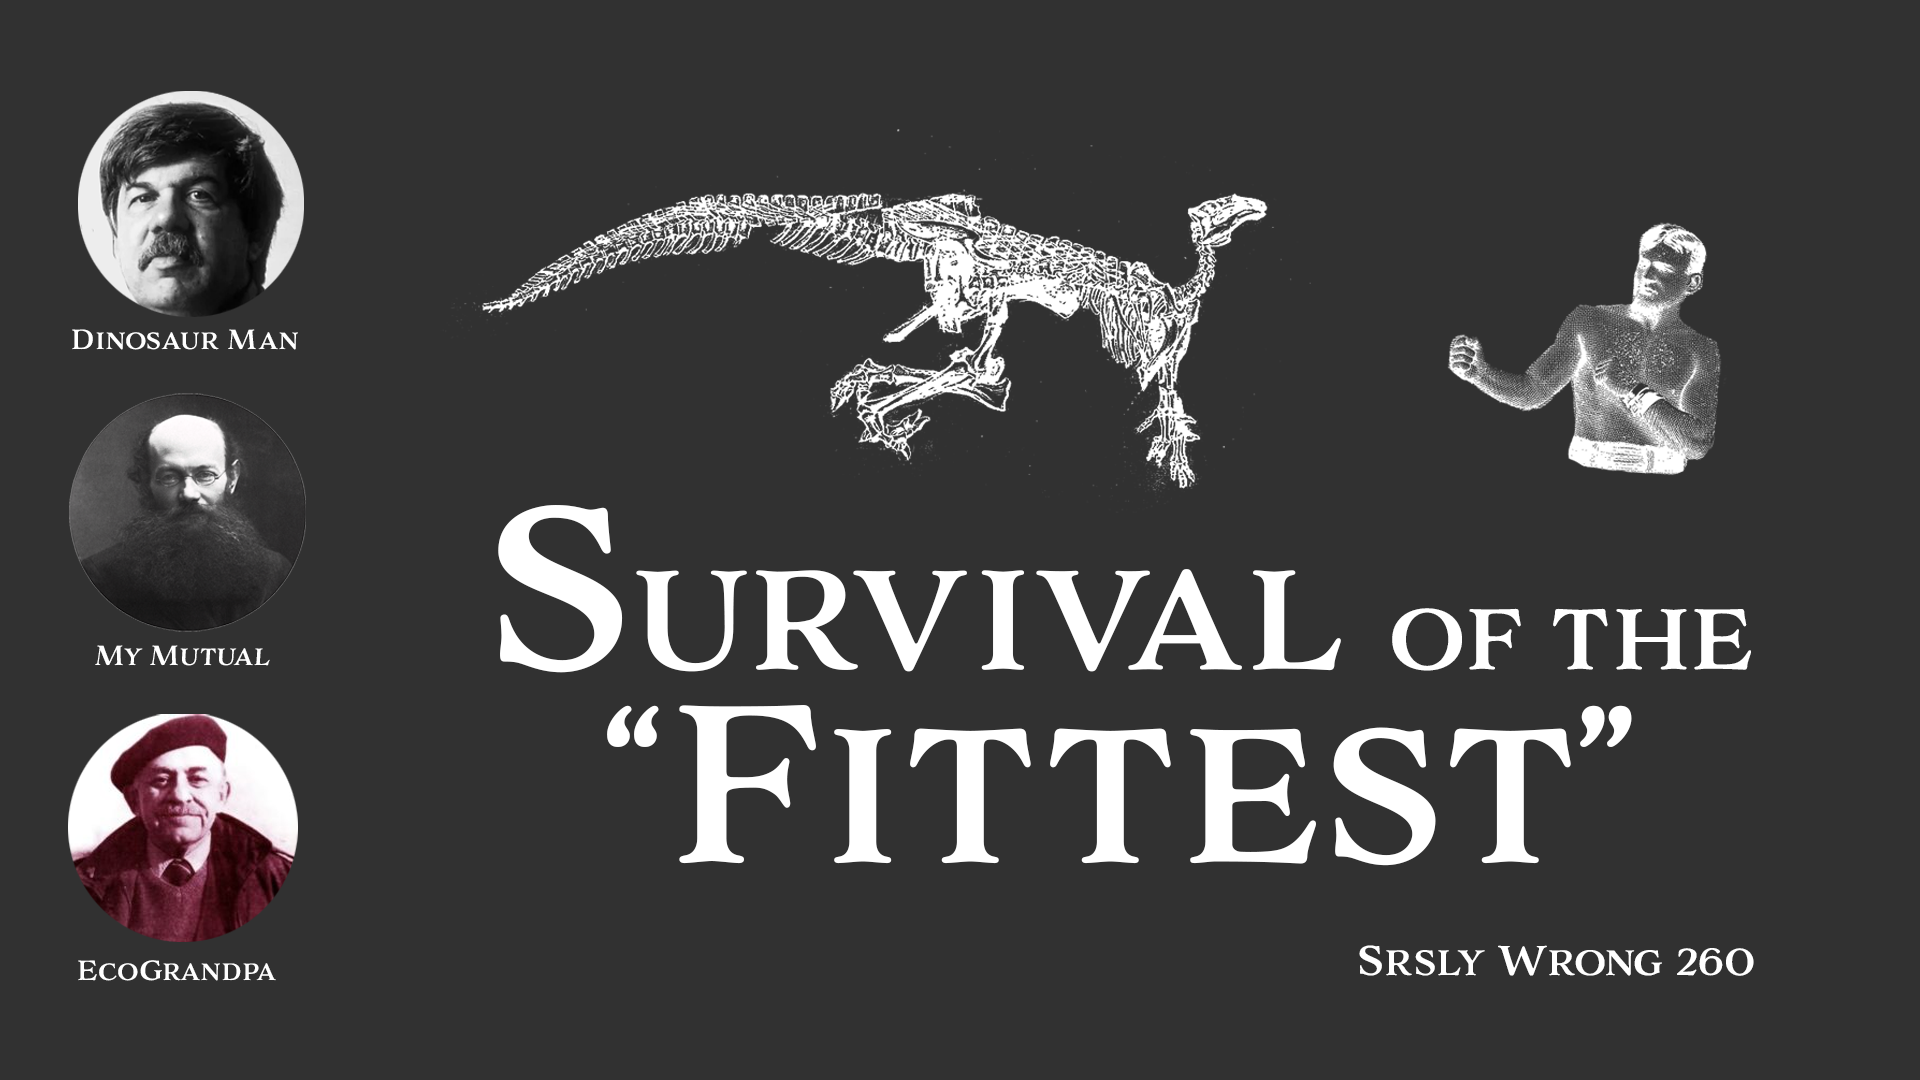 260 – Survival of the “Fittest”